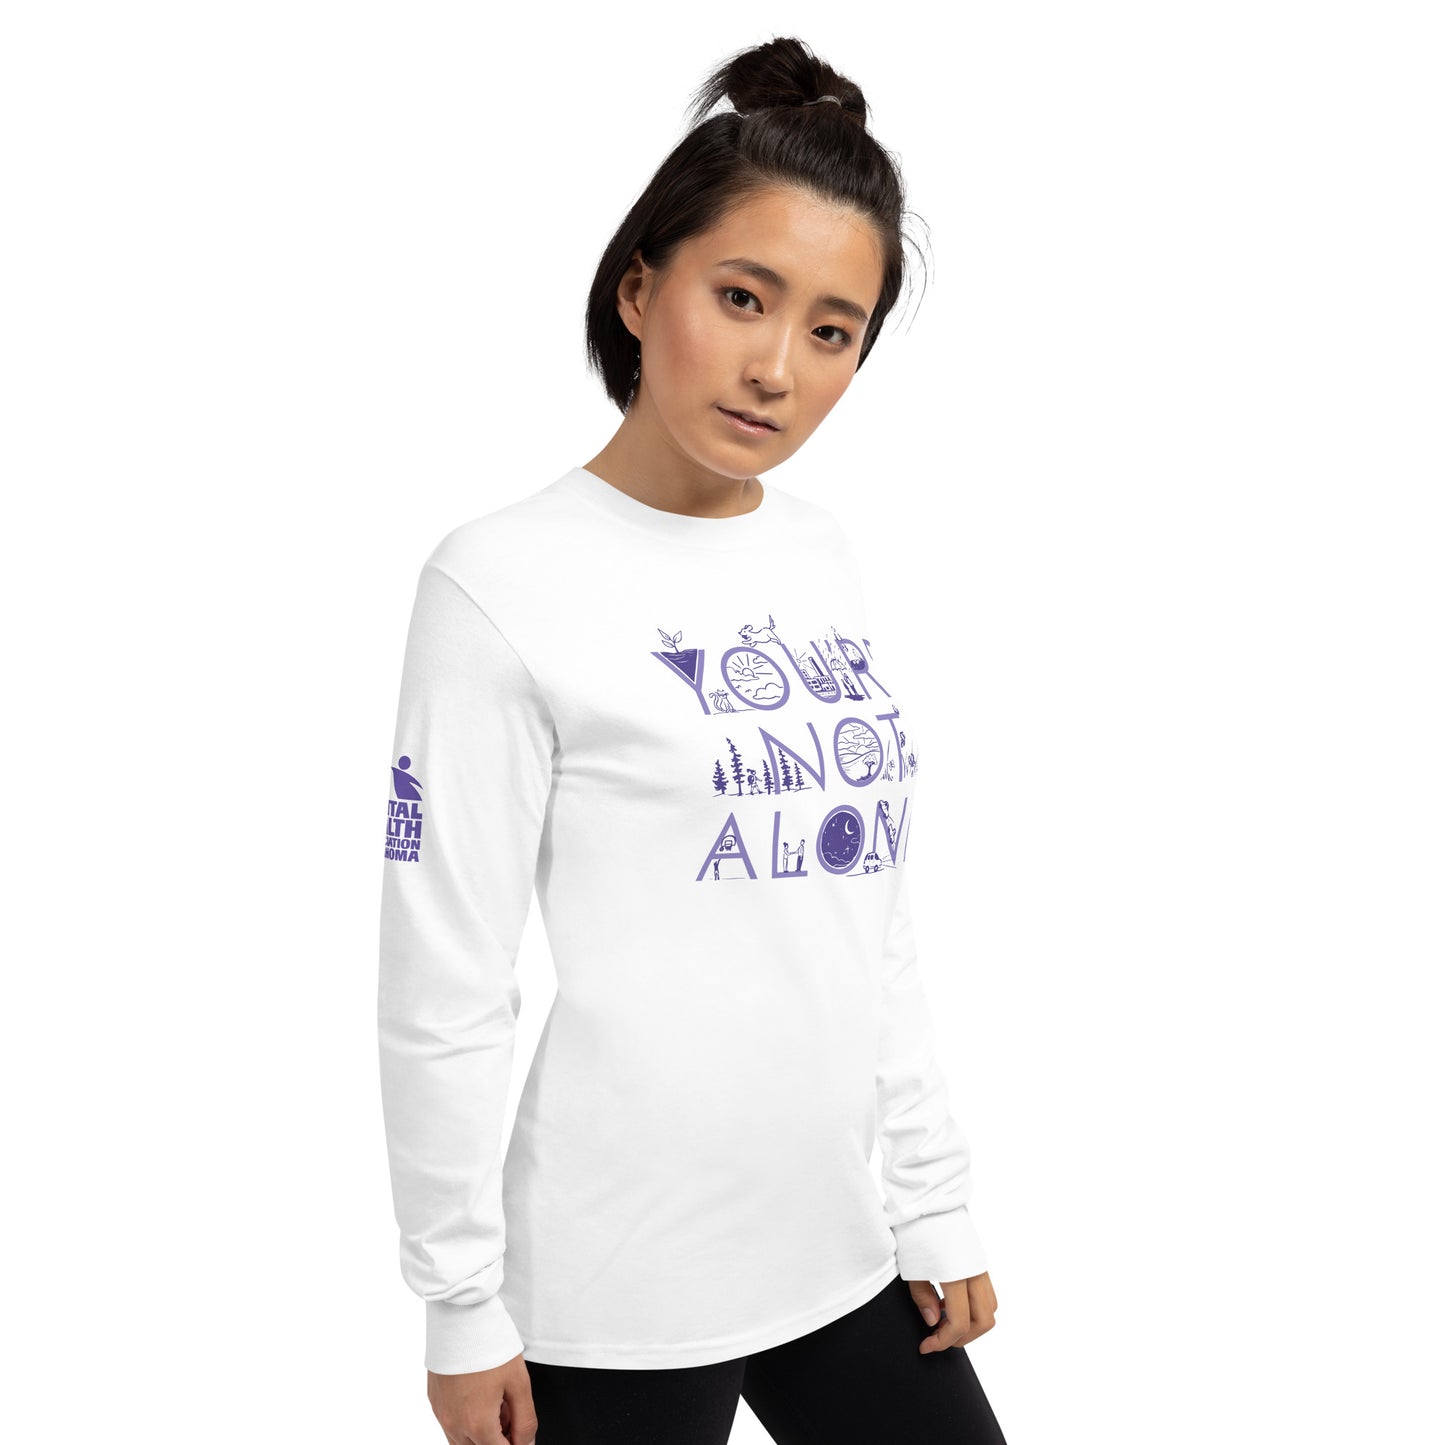 You're Not Alone long sleeve t-shirt